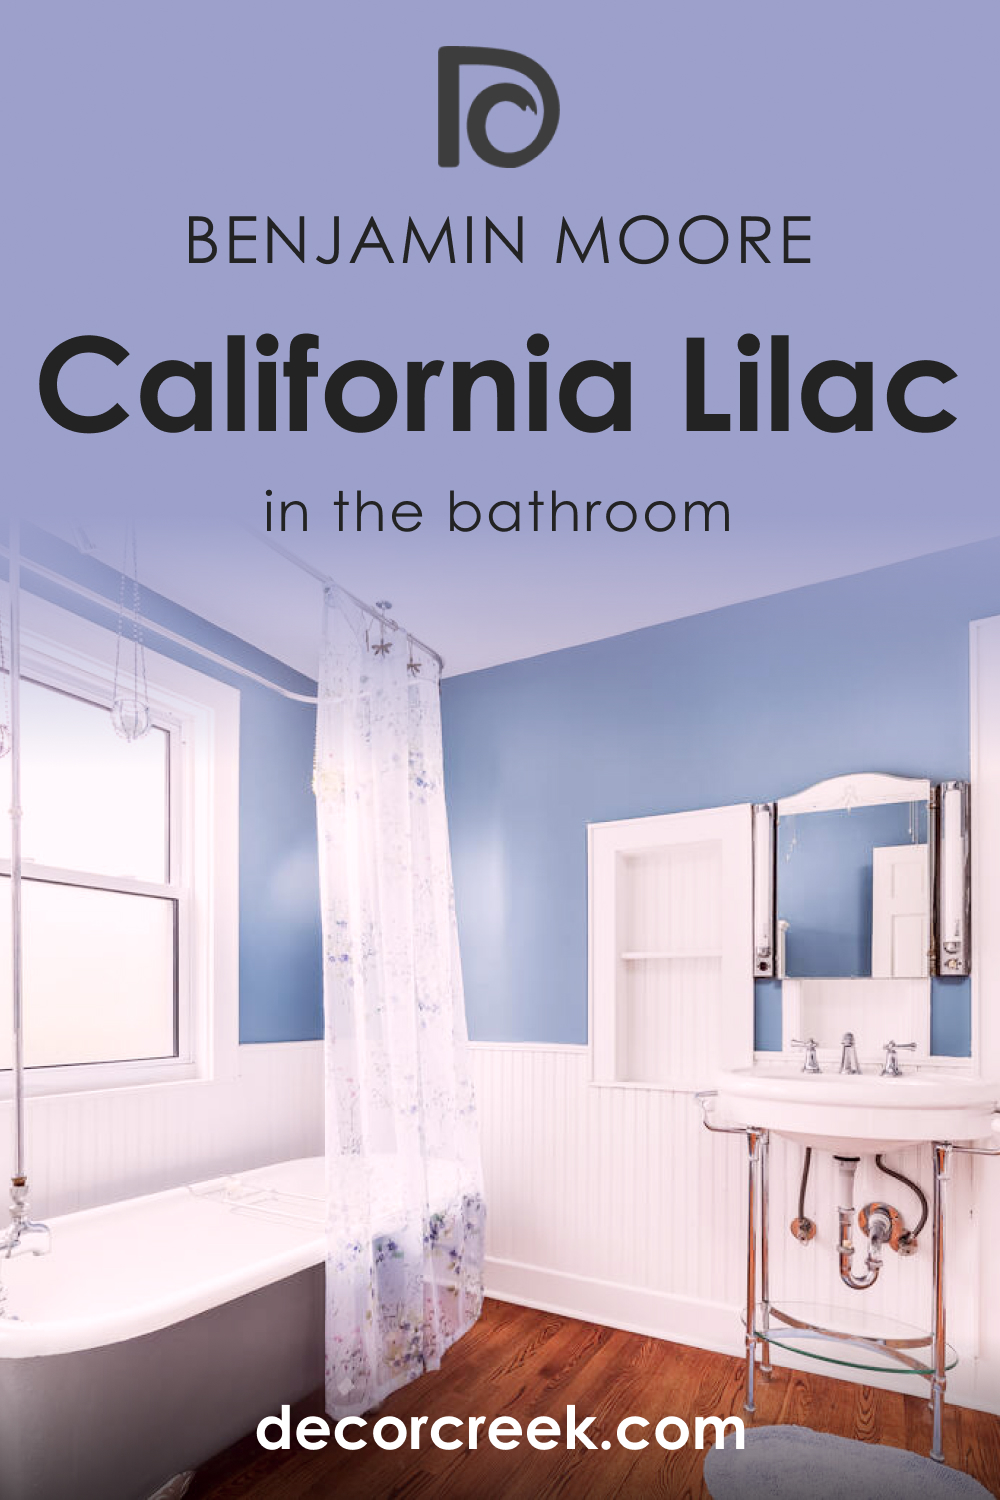 How to Use California Lilac 2068-40 in the Bathroom?